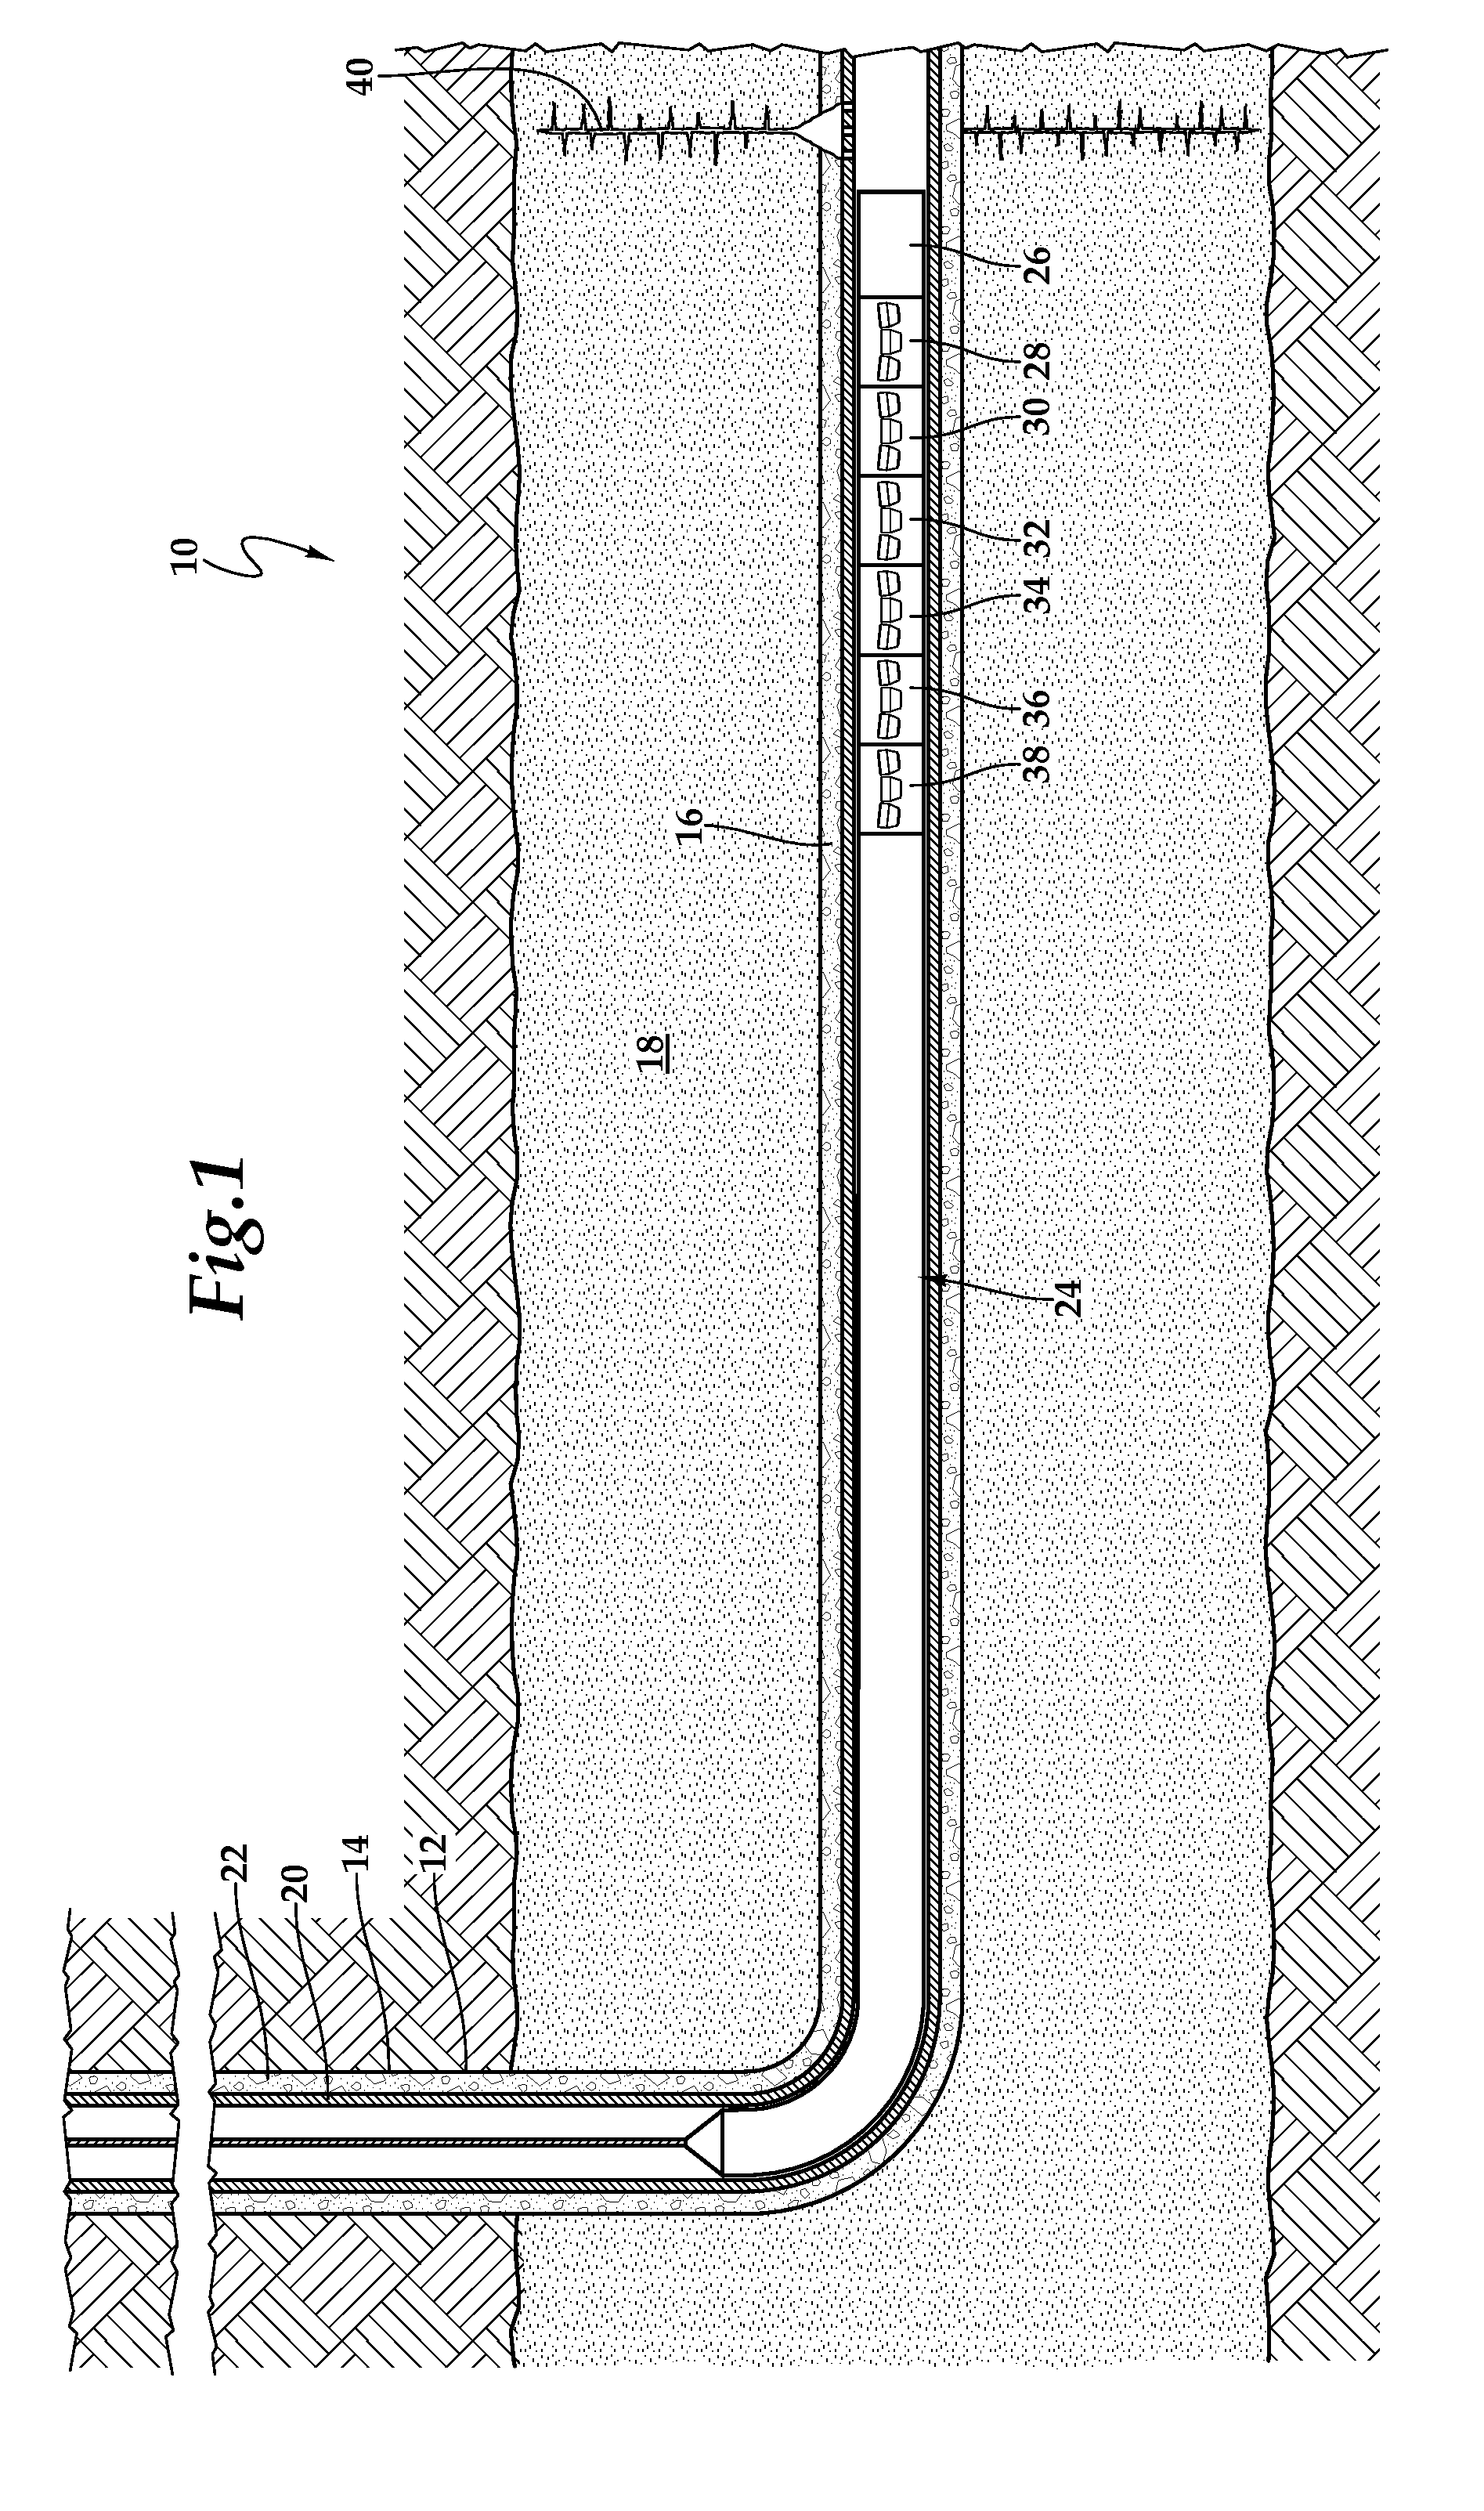 Method for generating discrete fracture initiation sites and propagating dominant planar fractures therefrom